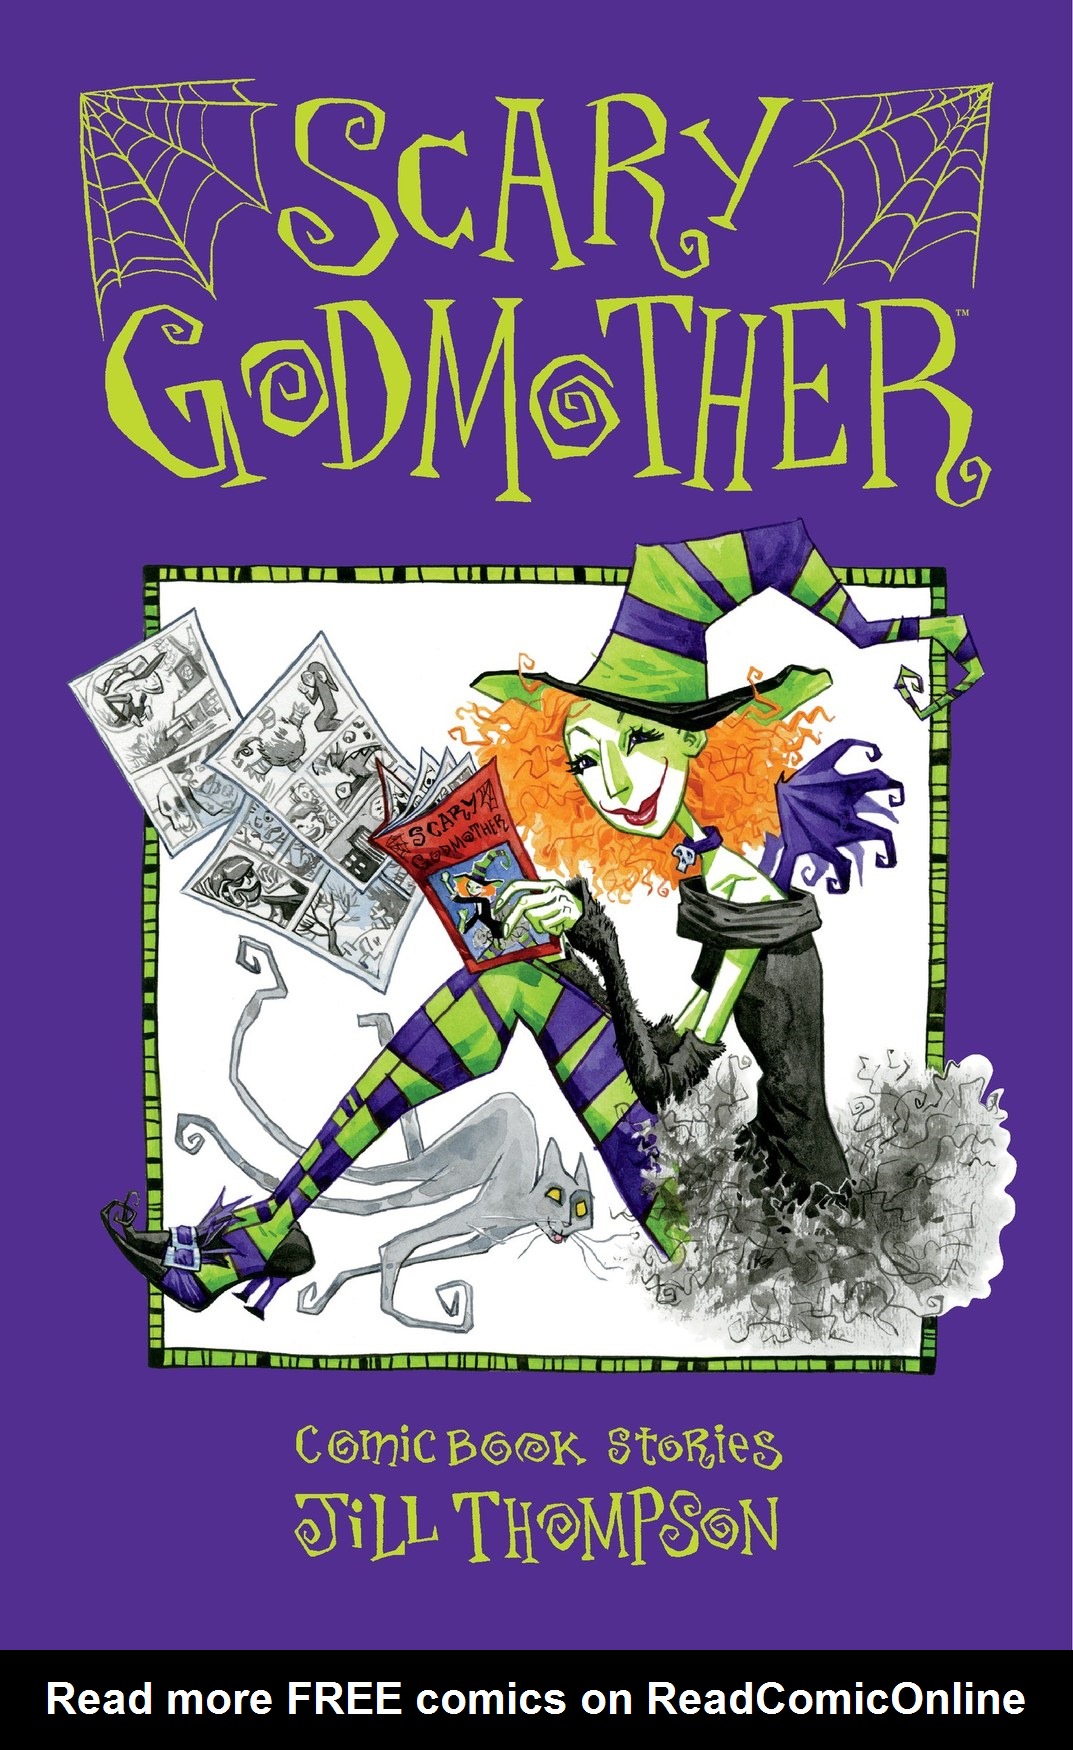 Read online Scary Godmother Comic Book Stories comic -  Issue # TPB - 1